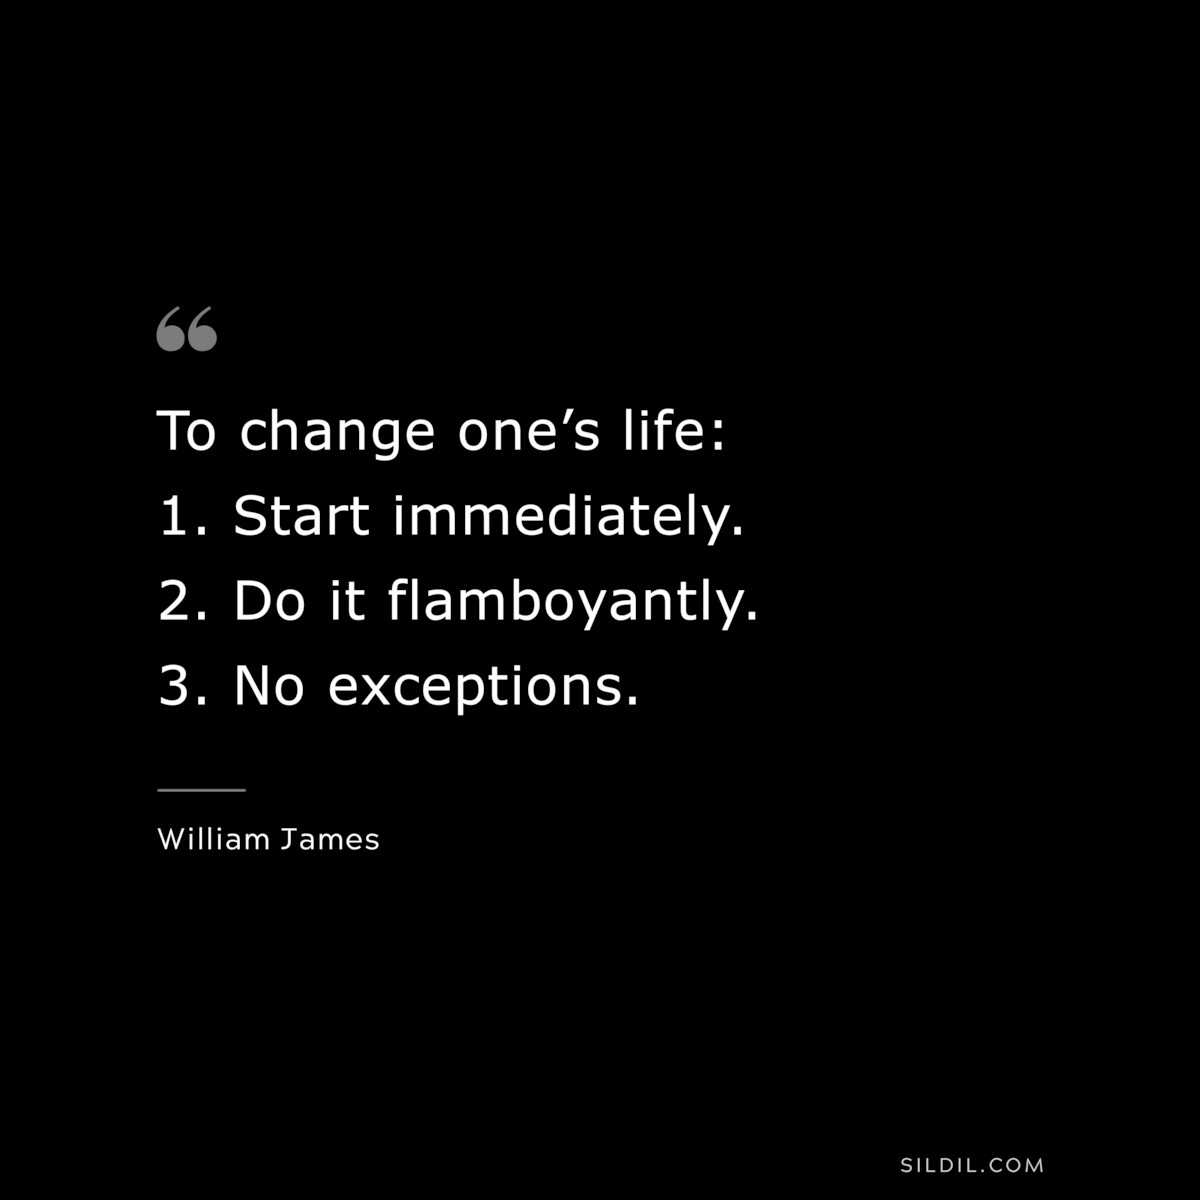 To change one’s life: 1. Start immediately. 2. Do it flamboyantly. 3. No exceptions. ― William James